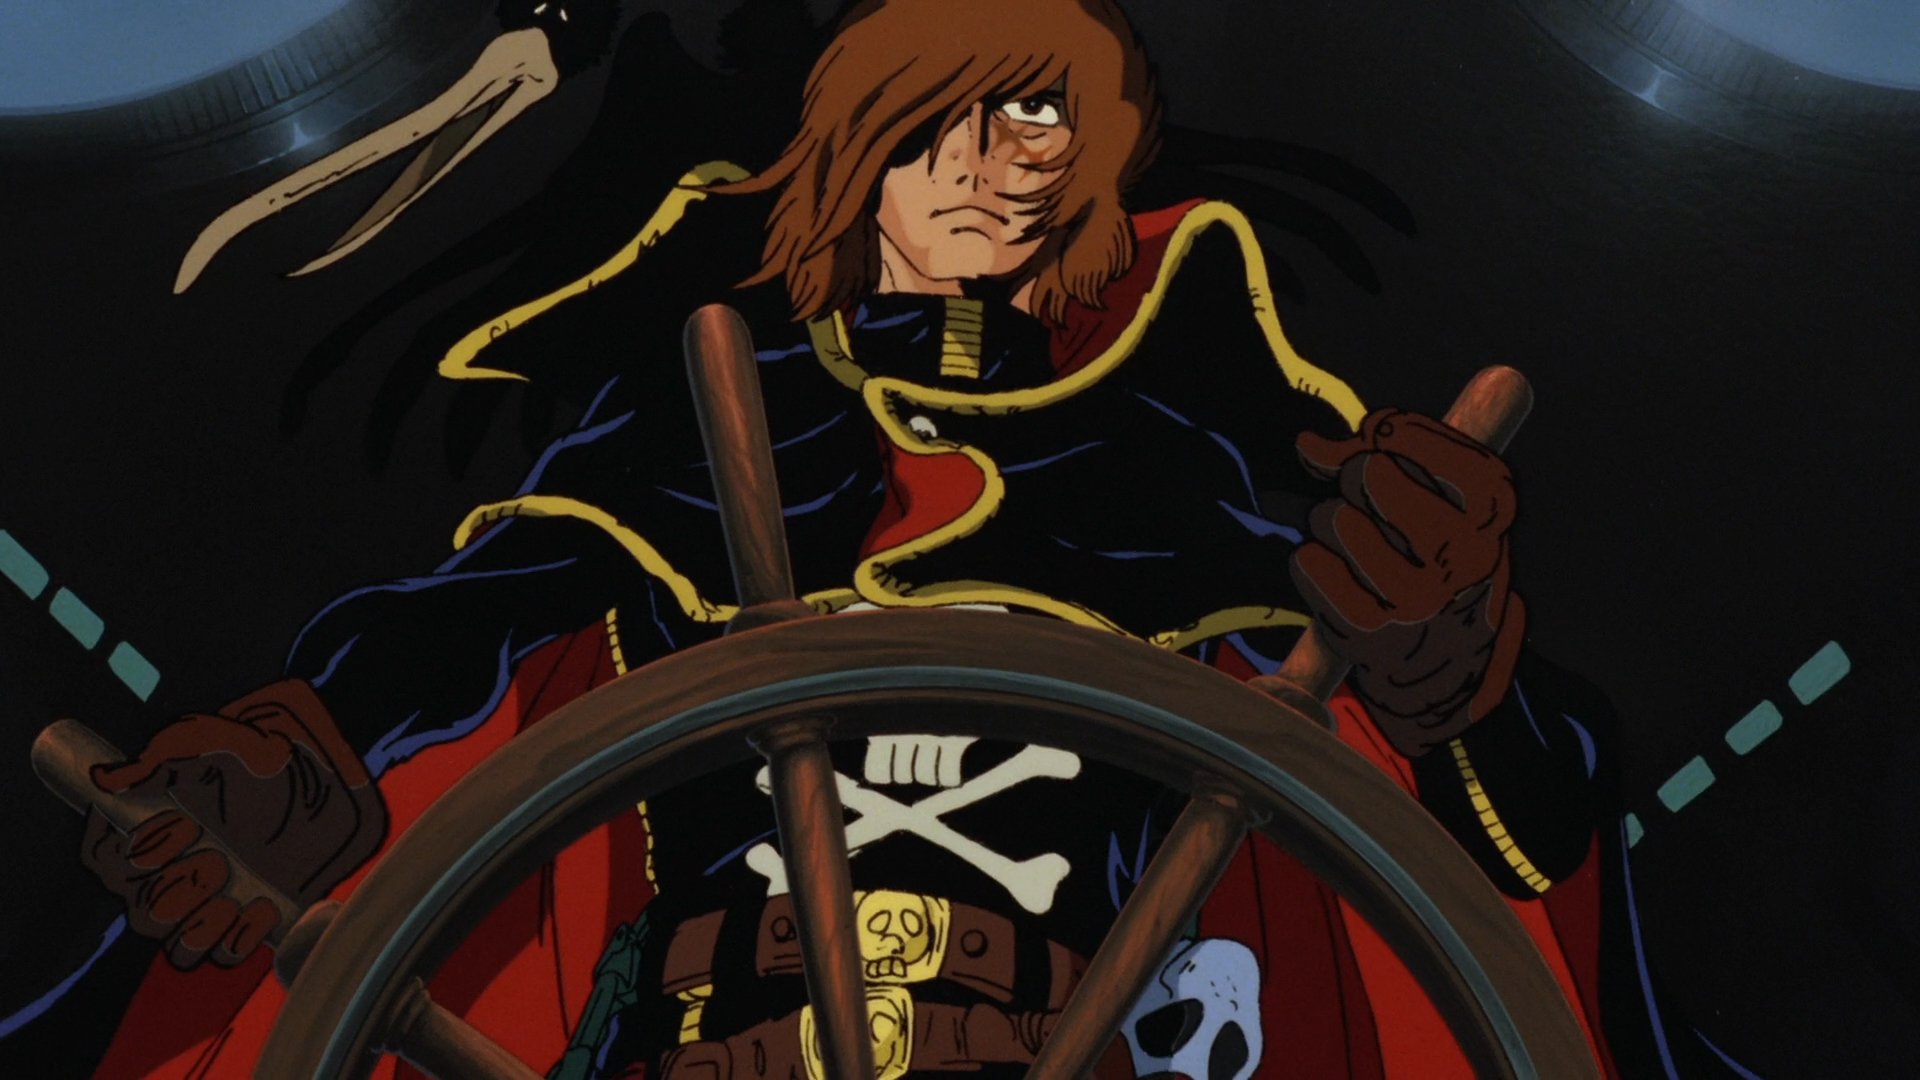 space pirate captain harlock english dubbed download